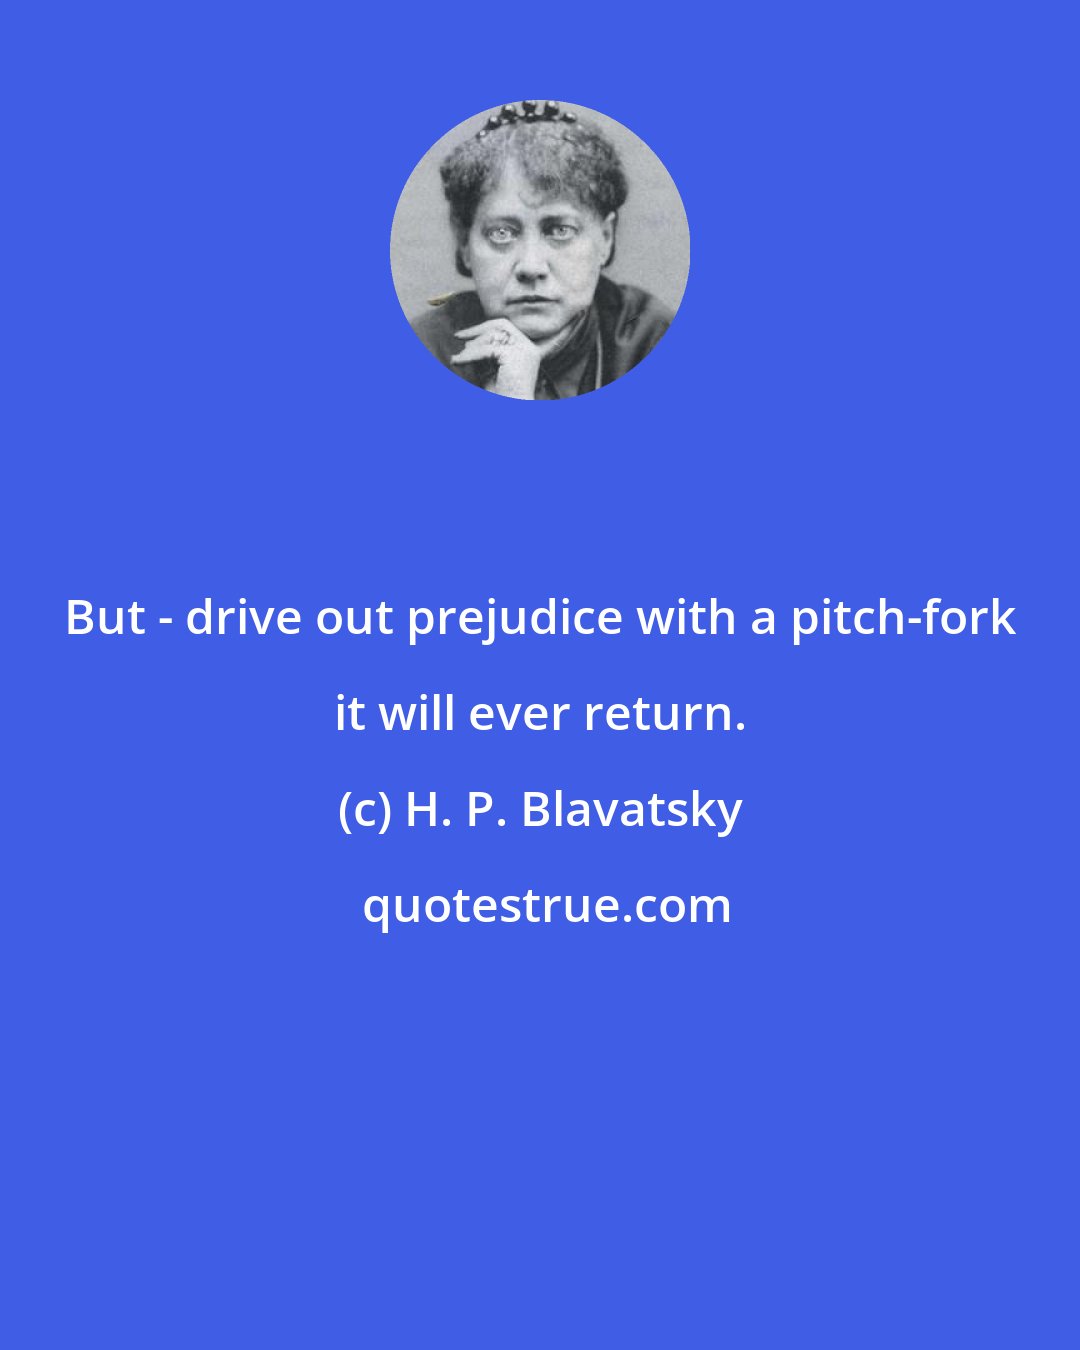 H. P. Blavatsky: But - drive out prejudice with a pitch-fork it will ever return.